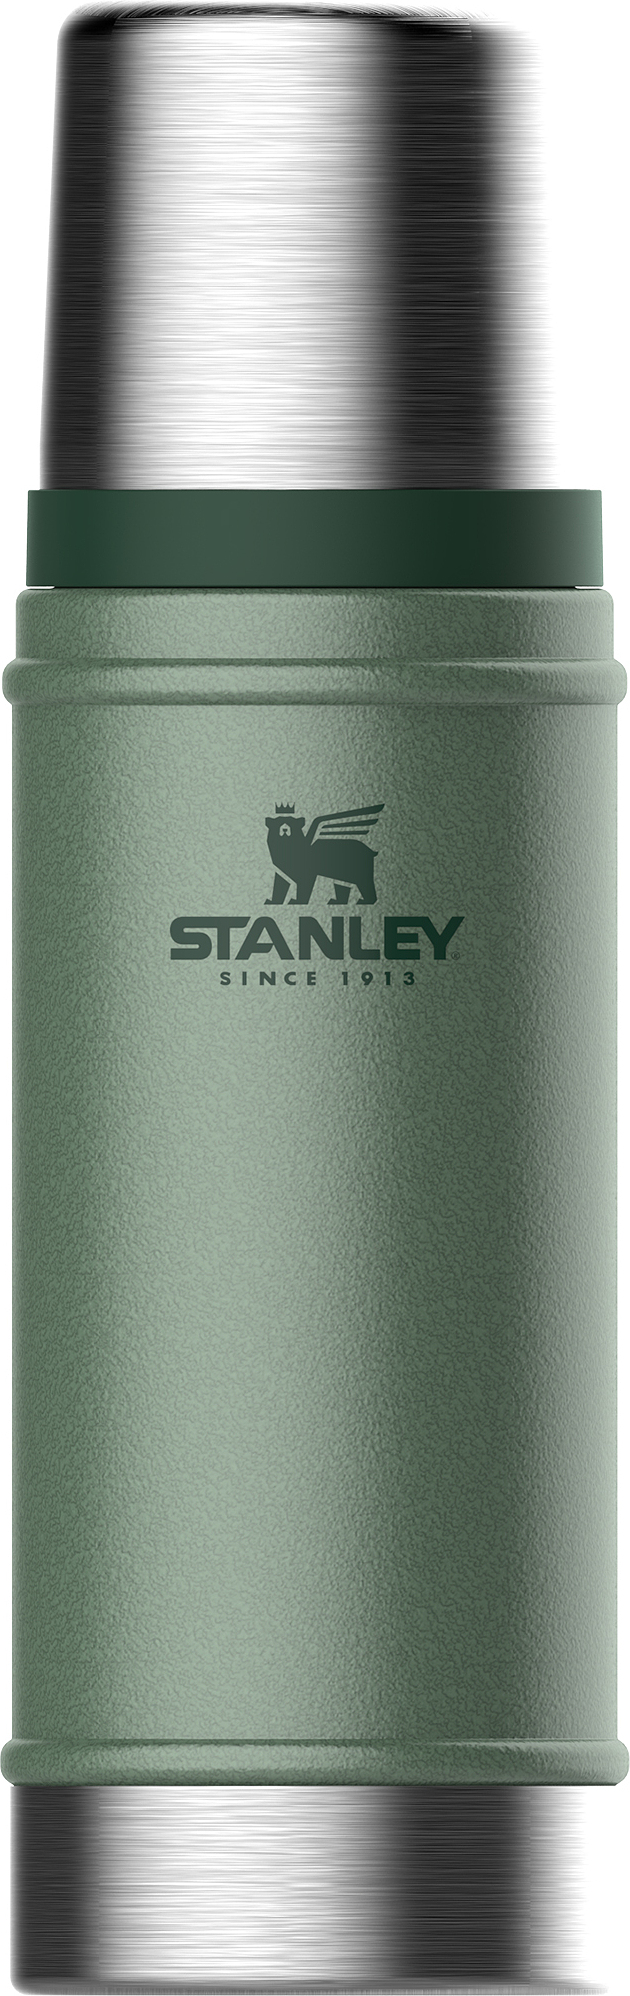 Legendary Classic Thermos green - Stanley 10-01228-072